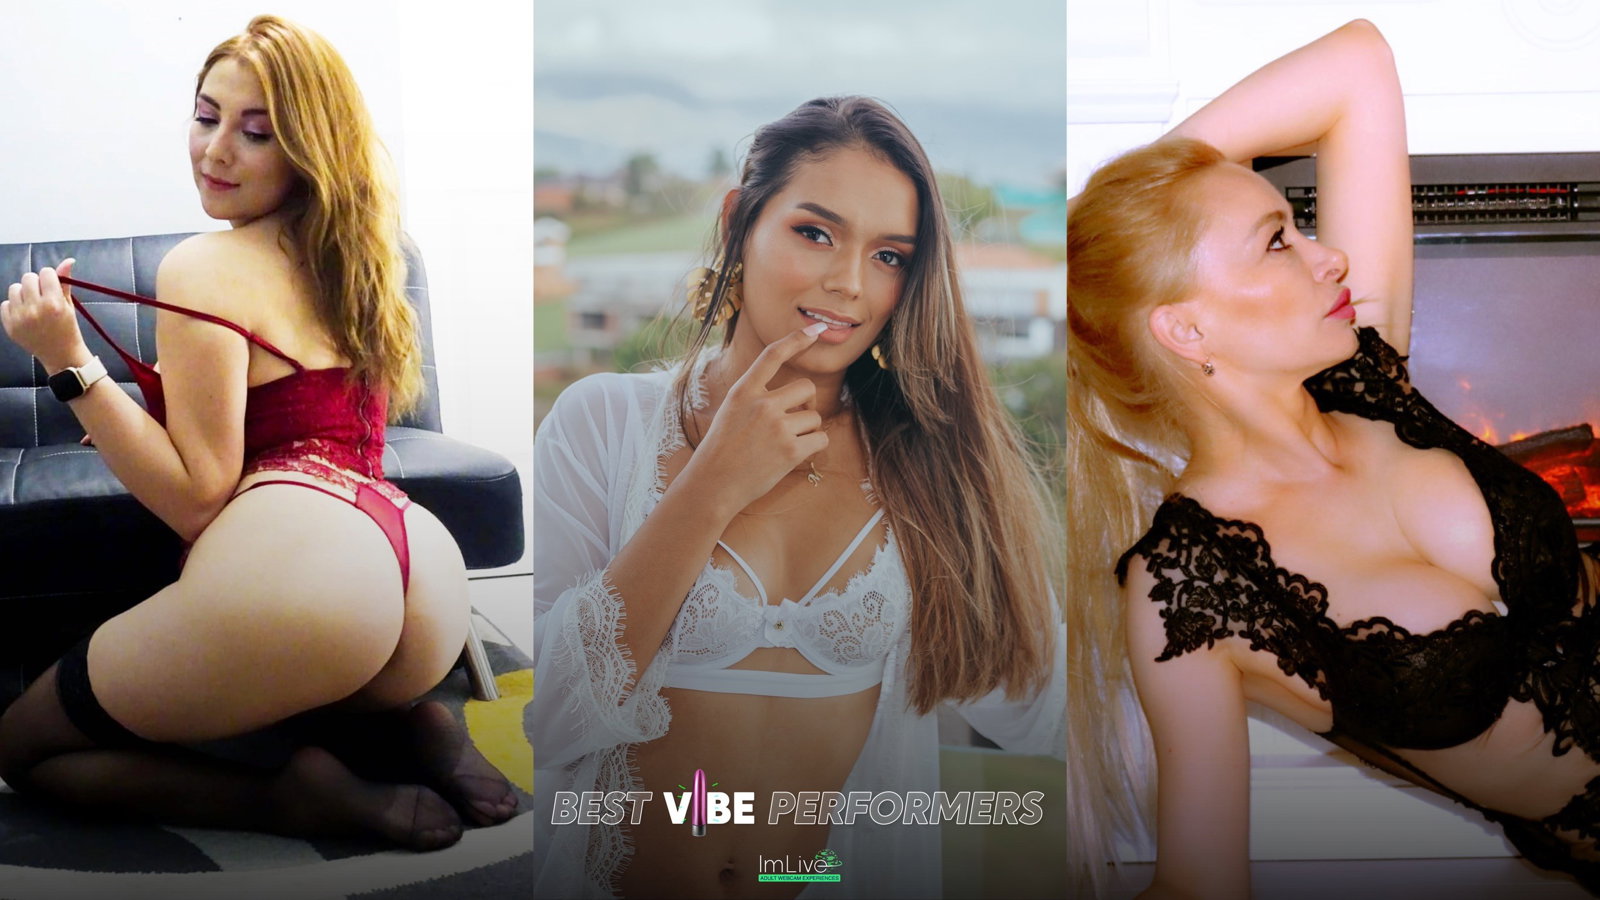 Photo by ImLive with the username @imlivenet, who is a brand user,  October 24, 2020 at 8:09 PM. The post is about the topic Beauty of the Female Form and the text says '🔥 Here the @ImLiveCom BEST VIBE PERFORMERS winners for the pay period of October 1-15 2020!

🥇 #KandaCat
🥈 #AriiSugar
🥉 #xWildBlondCatx

👉 http://imlurl.com/4Bhyvu 

[#imliveonImlive #pornlive #livecam #chatlive #stayhomedontdate #Ass #Sexy..'